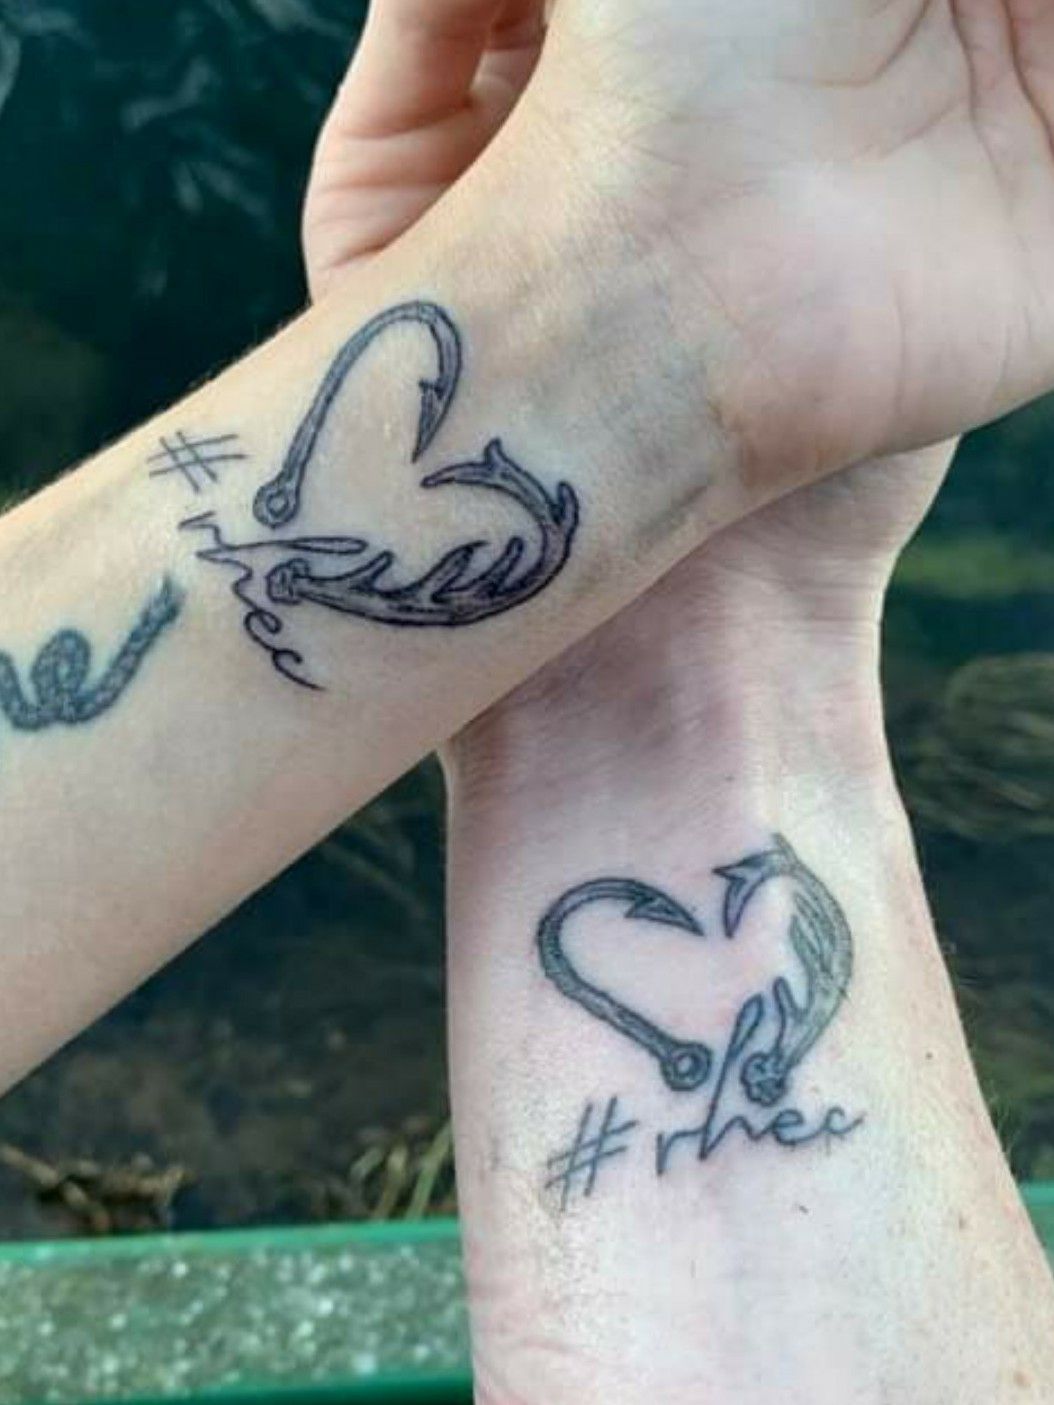 Tattoo uploaded by Jodie Sandoval • His and Hers matching tattoo I love you so much baby! #rhec #antler #fishhook #matching #country #love #hook • Tattoodo